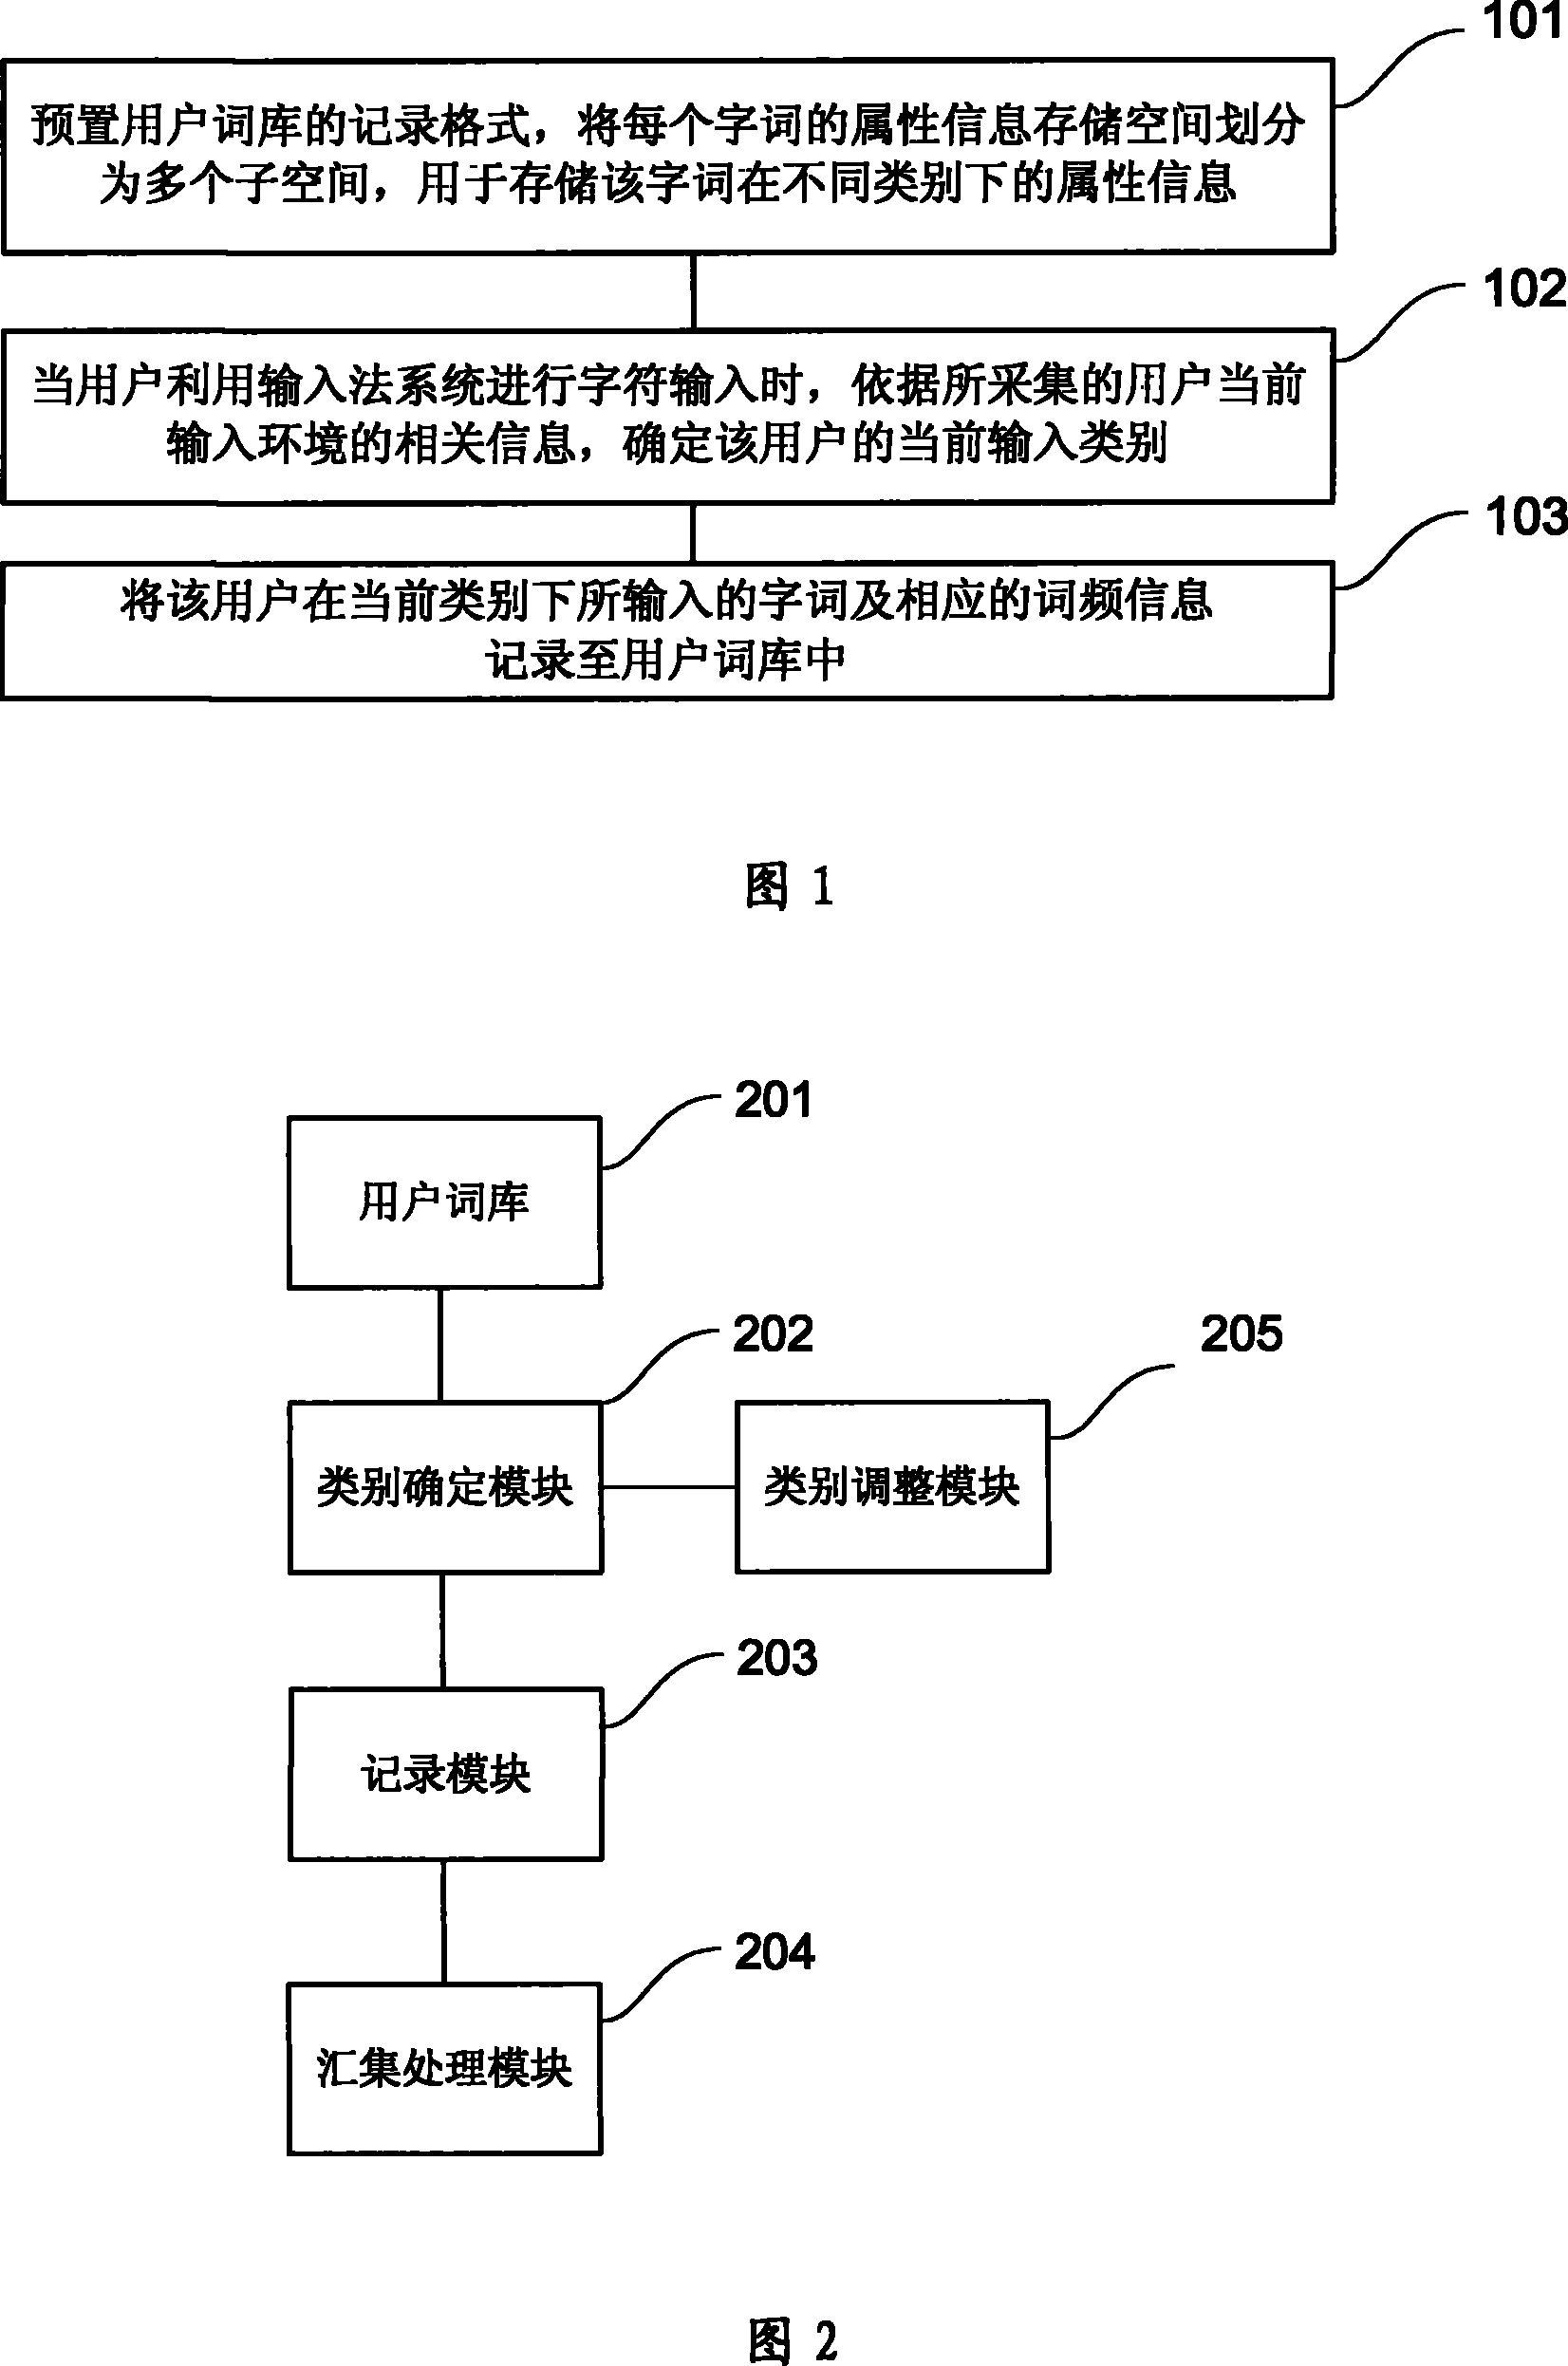 Method and apparatus for recording information into user thesaurus